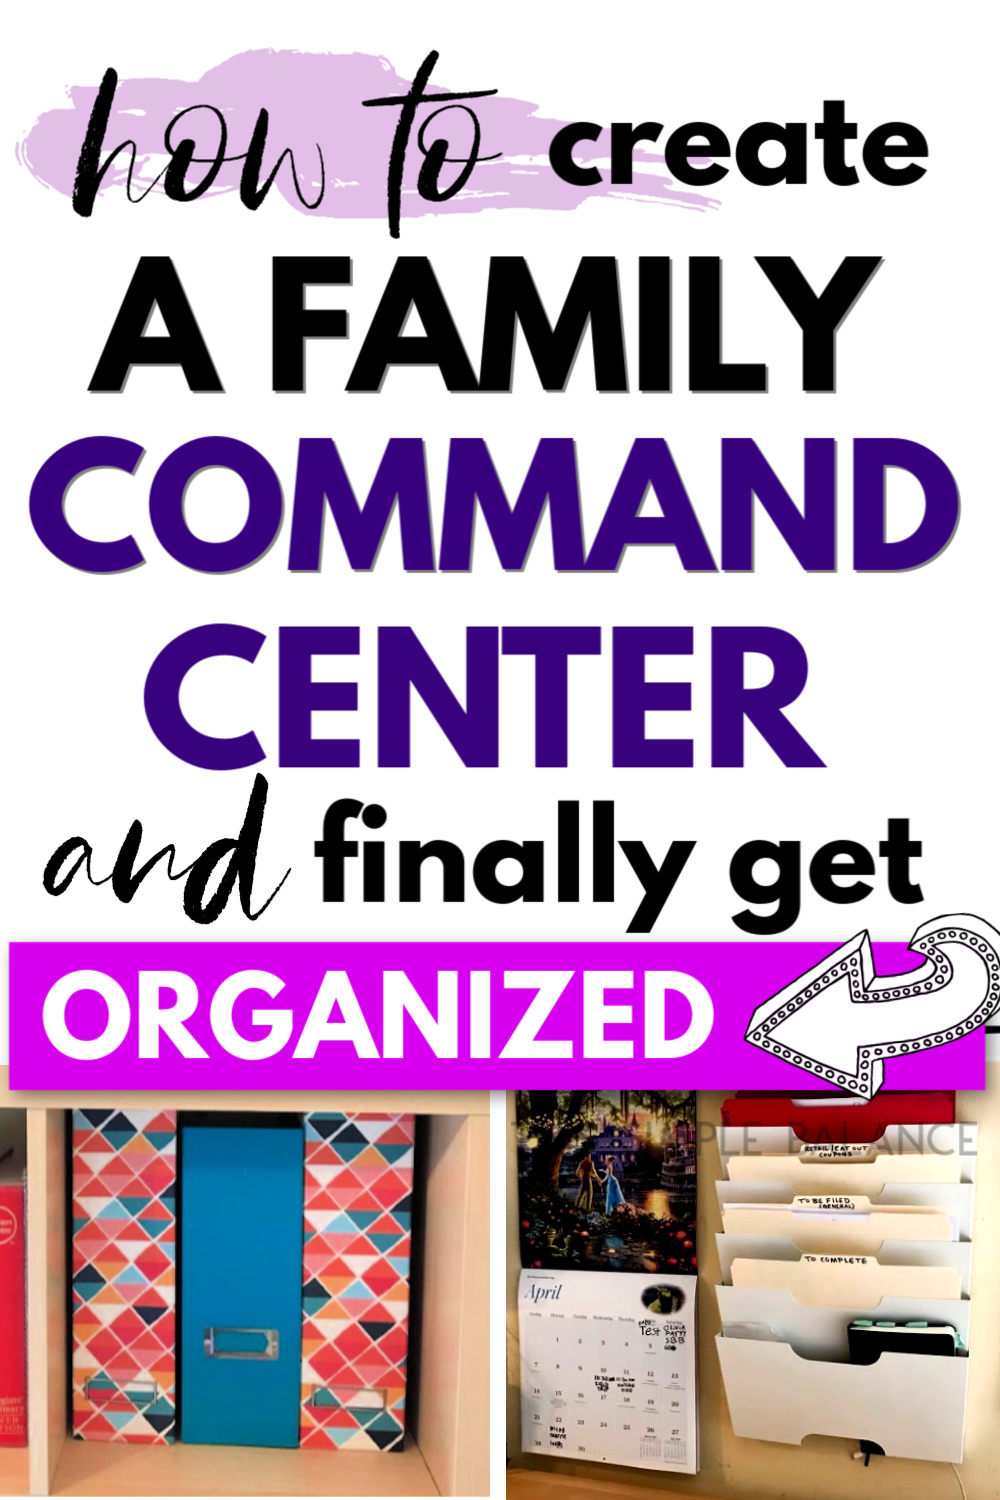 family command center with text overlay "how to create a family command center and finally get organized"